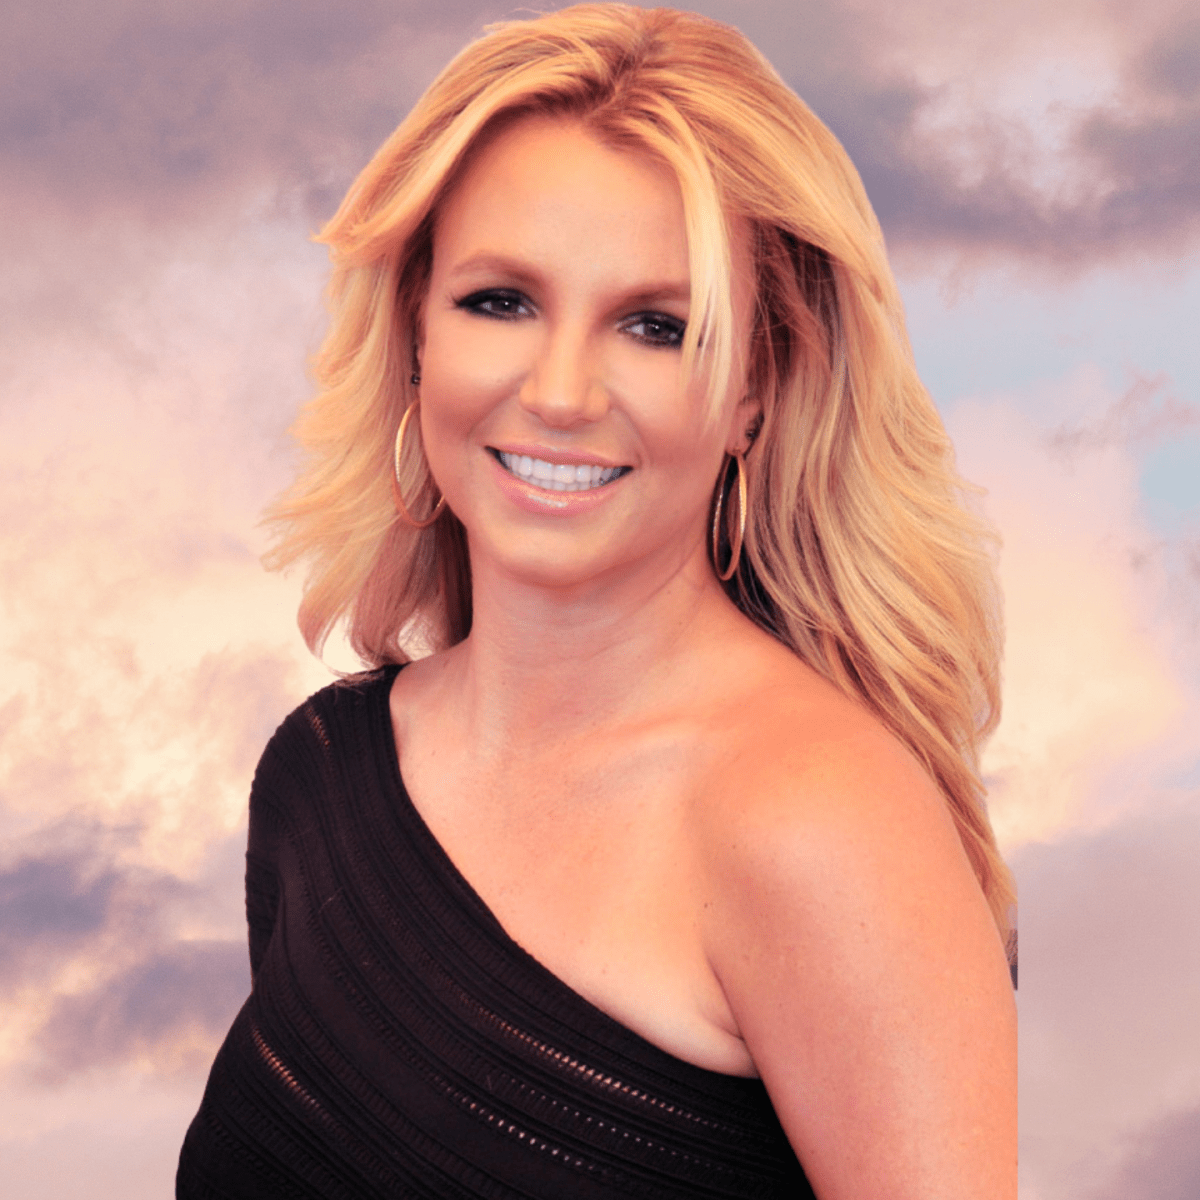 Britney Spears Hot Body Porn - Britney Spears Speaks Out on Coercive IUD, Working Conditions, and Putting  on a Smile for Social Media - Verily